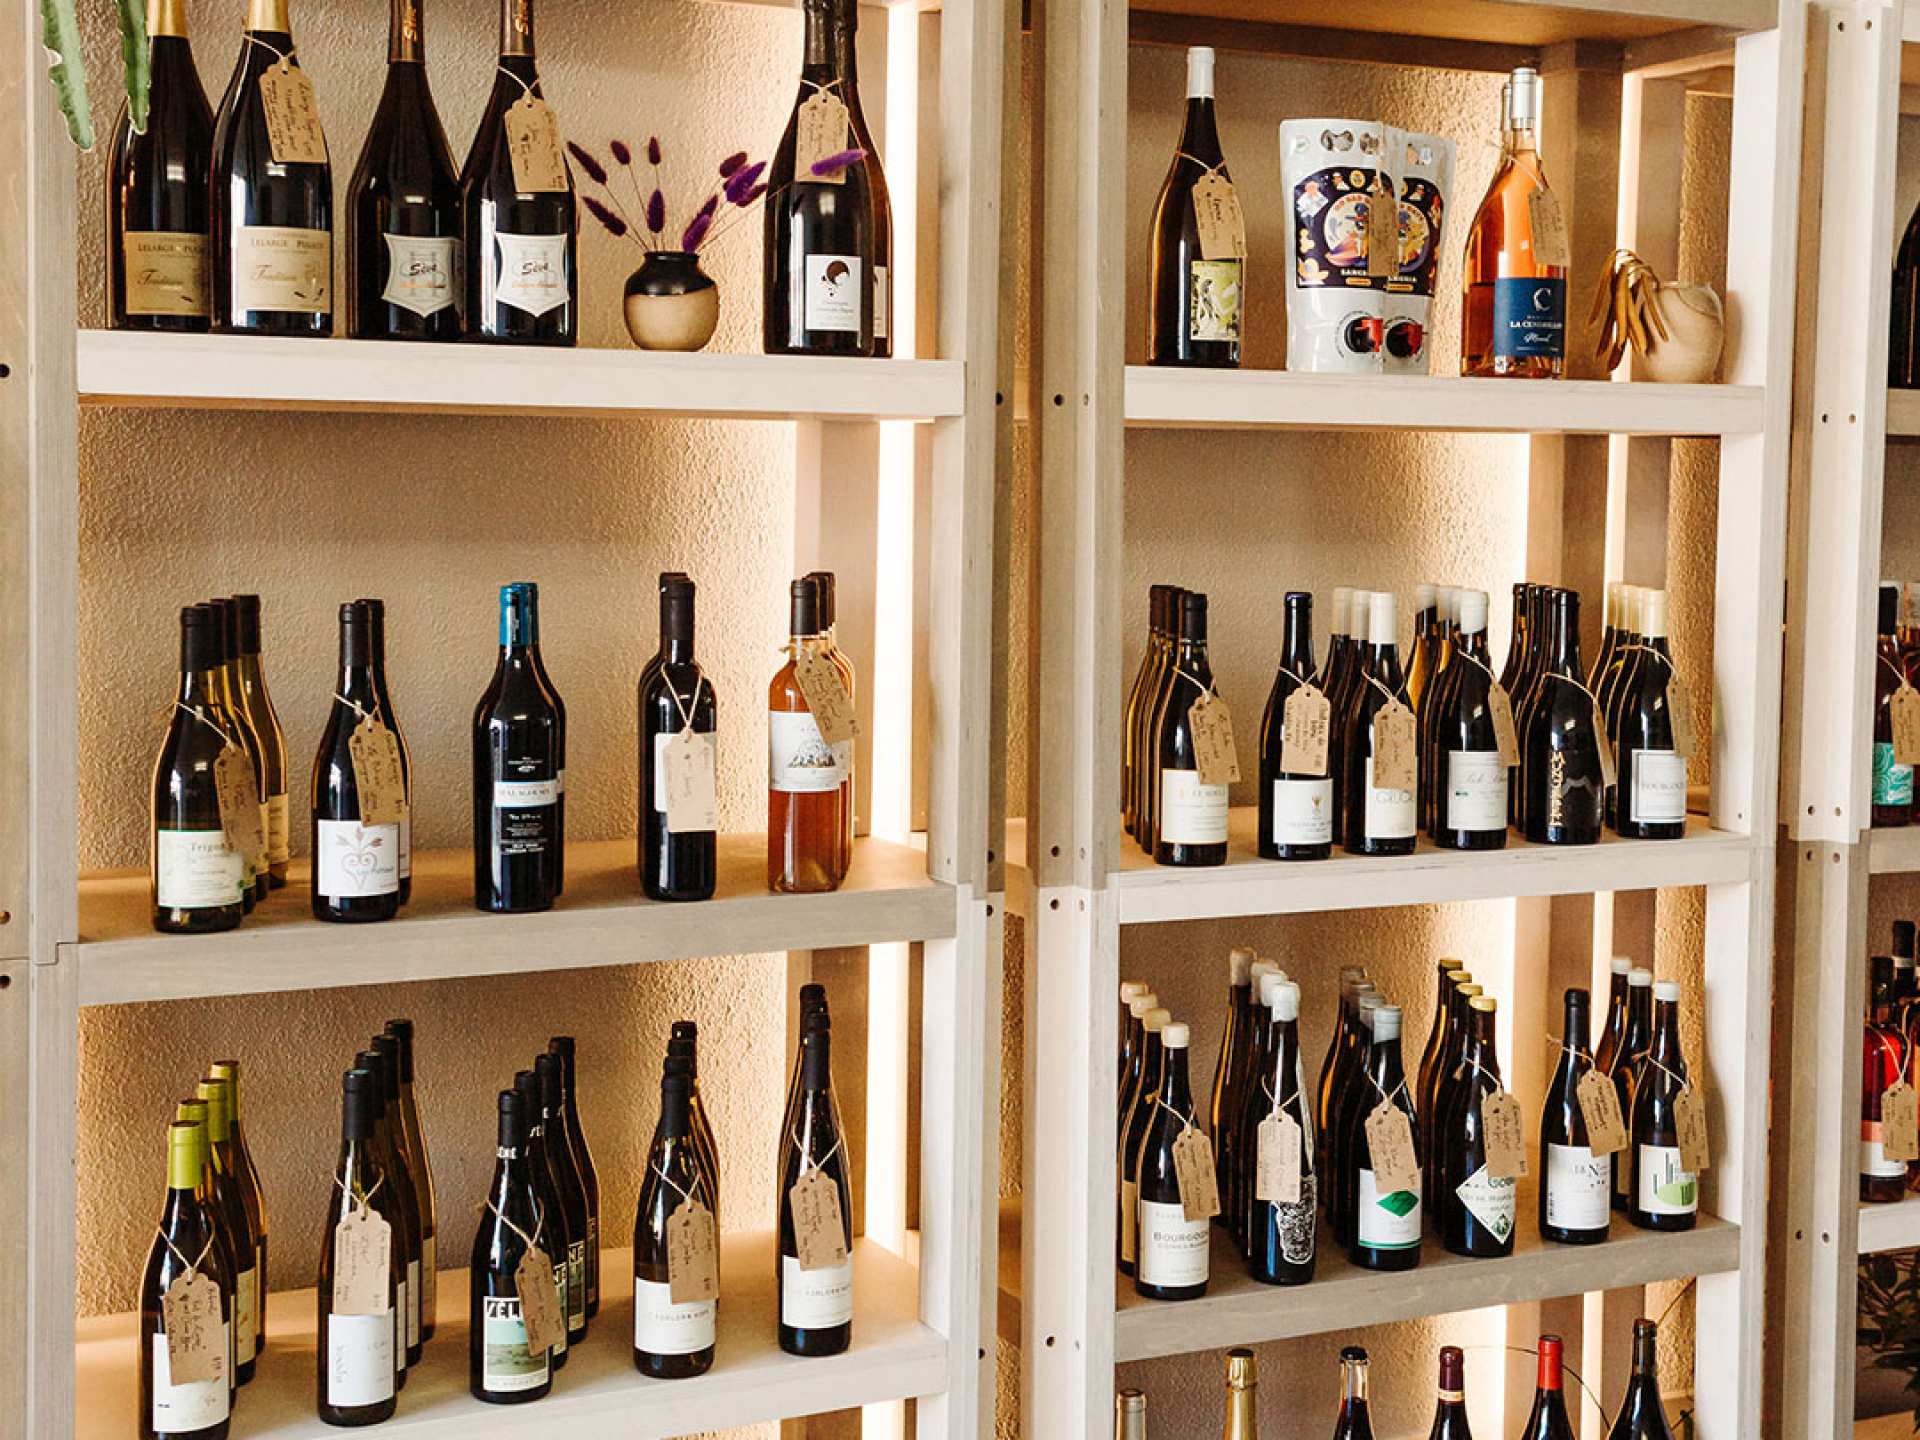 Natural wine Toronto | Wine shelves at Grape Witches wine store on Dundas West